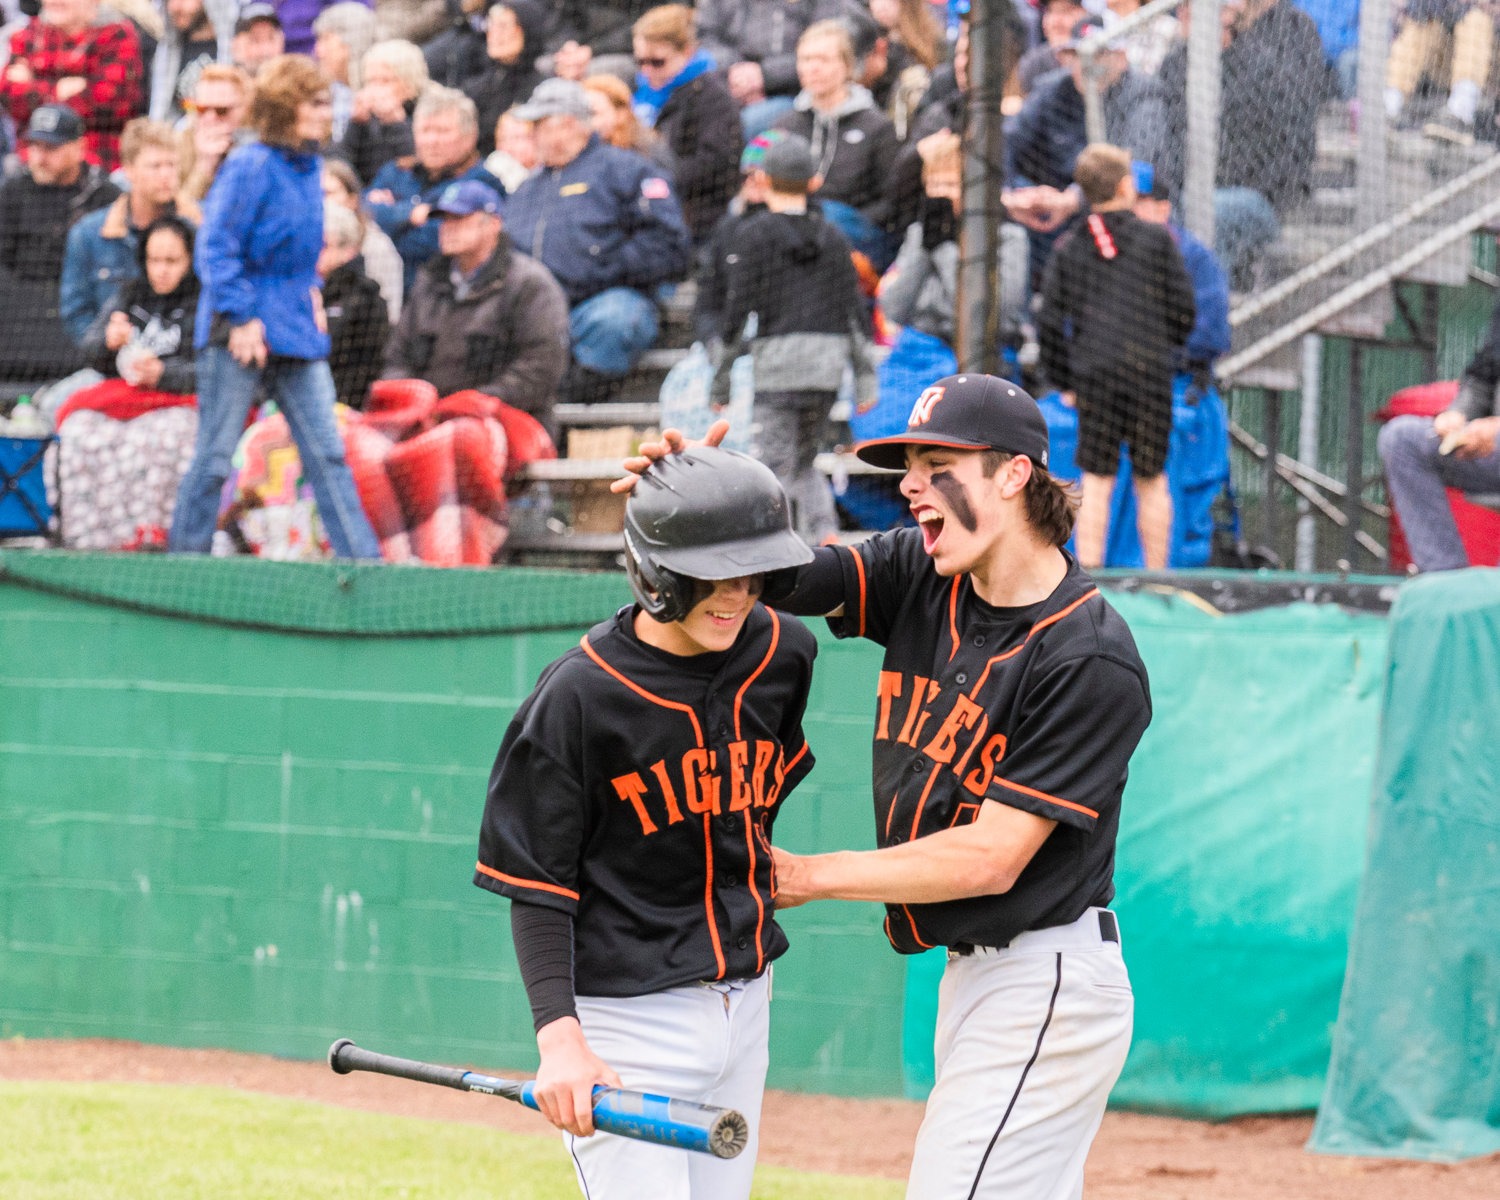 Tigers athletes get pumped up during a hitting rally Friday in Chehalis.